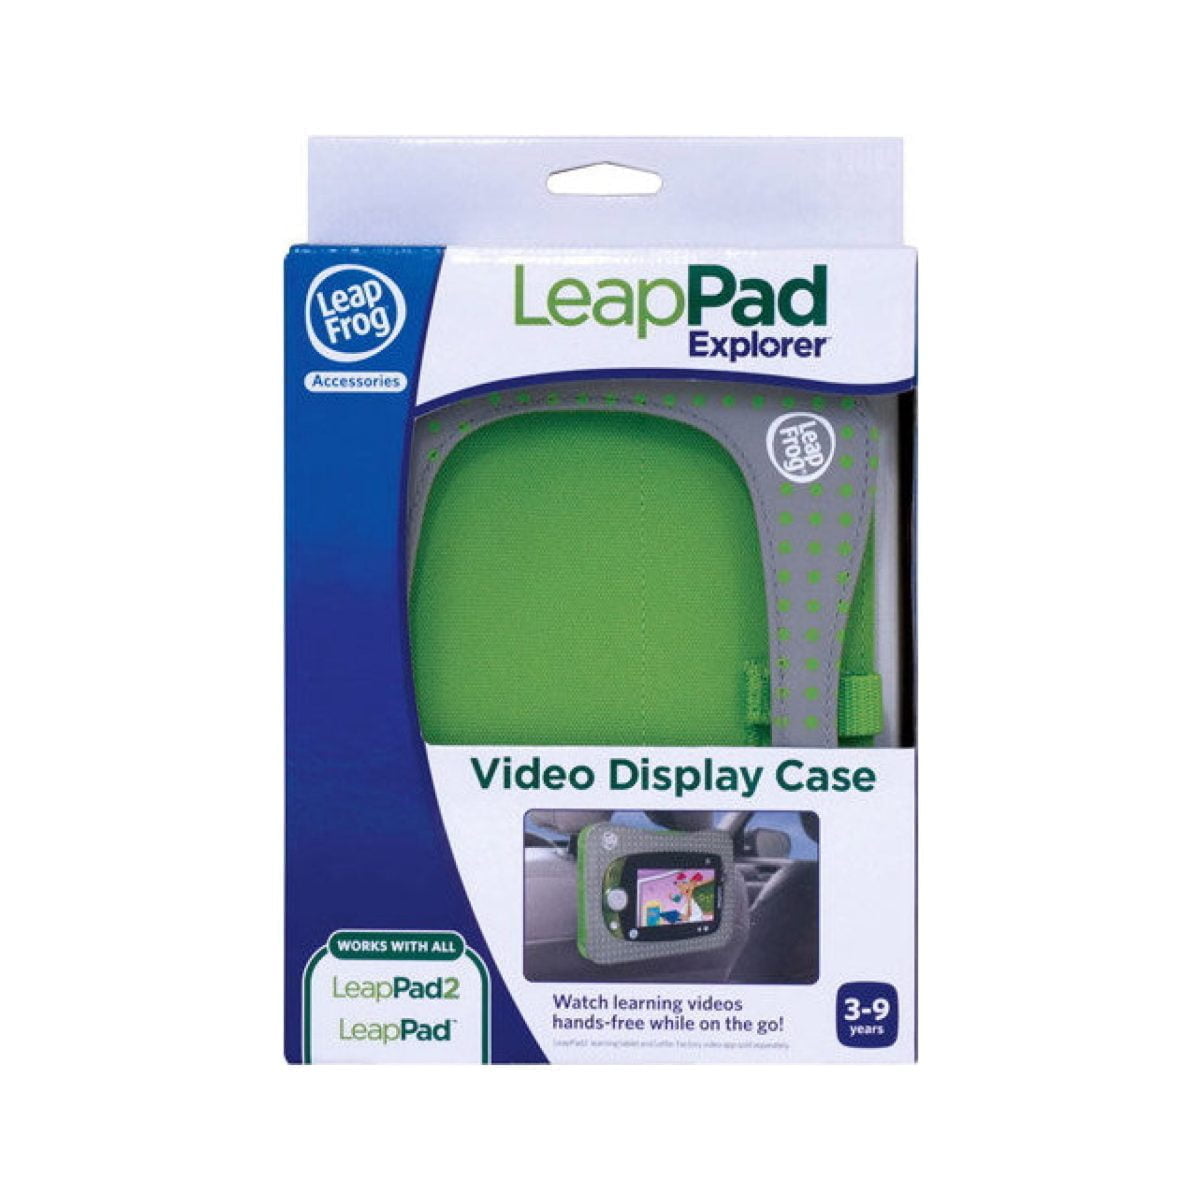 Leopard 05 Scaled &Amp;Lt;Div Class=&Amp;Quot;Good-Desc&Amp;Quot;&Amp;Gt; &Amp;Lt;P Class=&Amp;Quot;Description&Amp;Quot;&Amp;Gt;Your Little One Can Learn On The Go With This Video Display Case From Leapfrog. It Works With Leappad And Leappad2 Learning Systems. Just Pop The Learning Tablet Into The Soft Case And Attach It To The Headrest In Your Vehicle For Fun On The Road. Slide An Extra Cartridge Into The Attached Pouch, And Take Your Child&Amp;Quot;S Favorite Videos Along For The Ride.&Amp;Lt;/P&Amp;Gt; &Amp;Lt;/Div&Amp;Gt; &Amp;Lt;Div Class=&Amp;Quot;Goods-Panel&Amp;Quot; Role=&Amp;Quot;Tabpanel&Amp;Quot;&Amp;Gt; &Amp;Nbsp; &Amp;Lt;/Div&Amp;Gt; Leapfrog Leappad Leapfrog Leappad Video Display Case